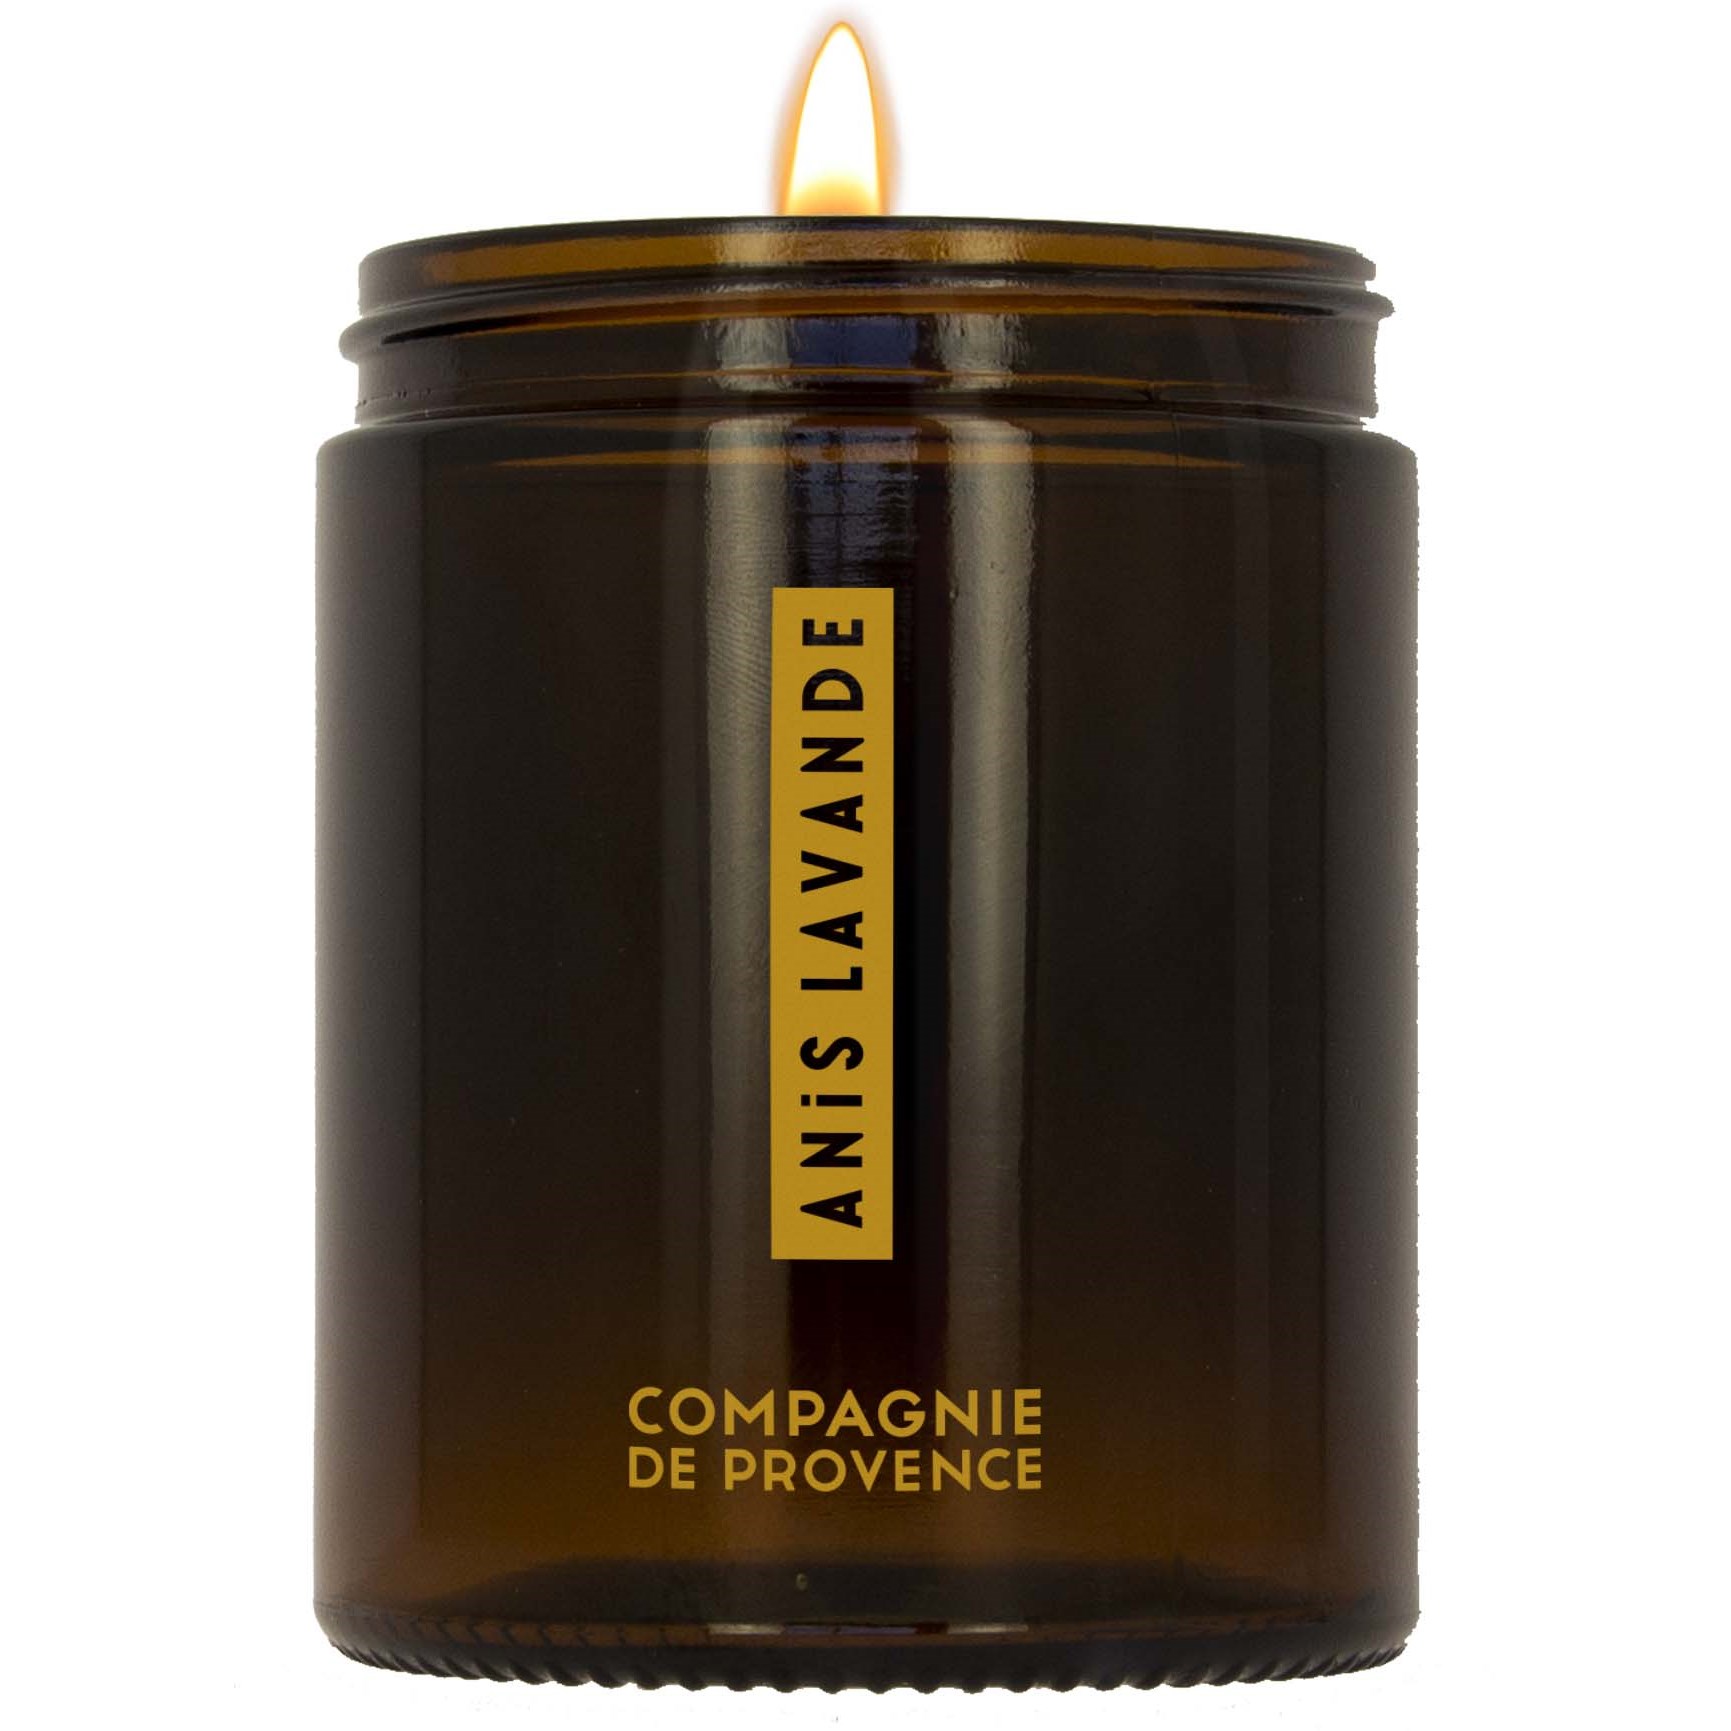 Bilde av Compagnie De Provence Apothicare Scented Candle Anise Lavender